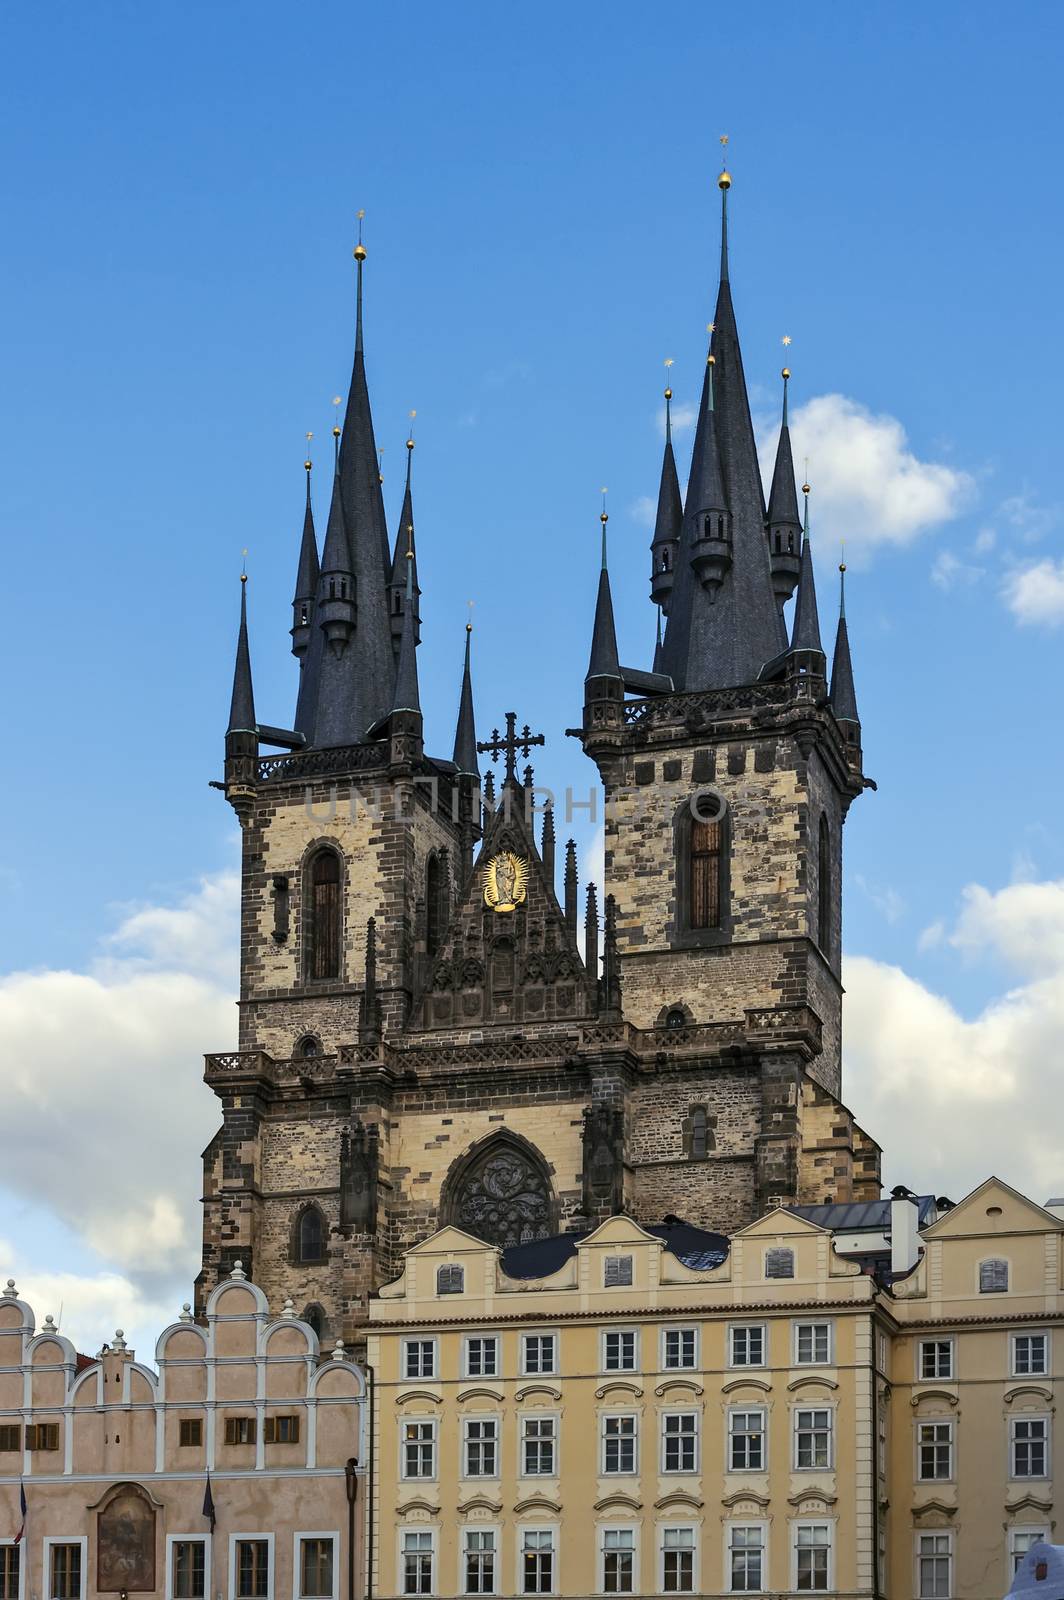 Church of Our Lady before Tyn is a dominant feature of the Old Town of Prague and has been the main church of this part of the city since the 14th century